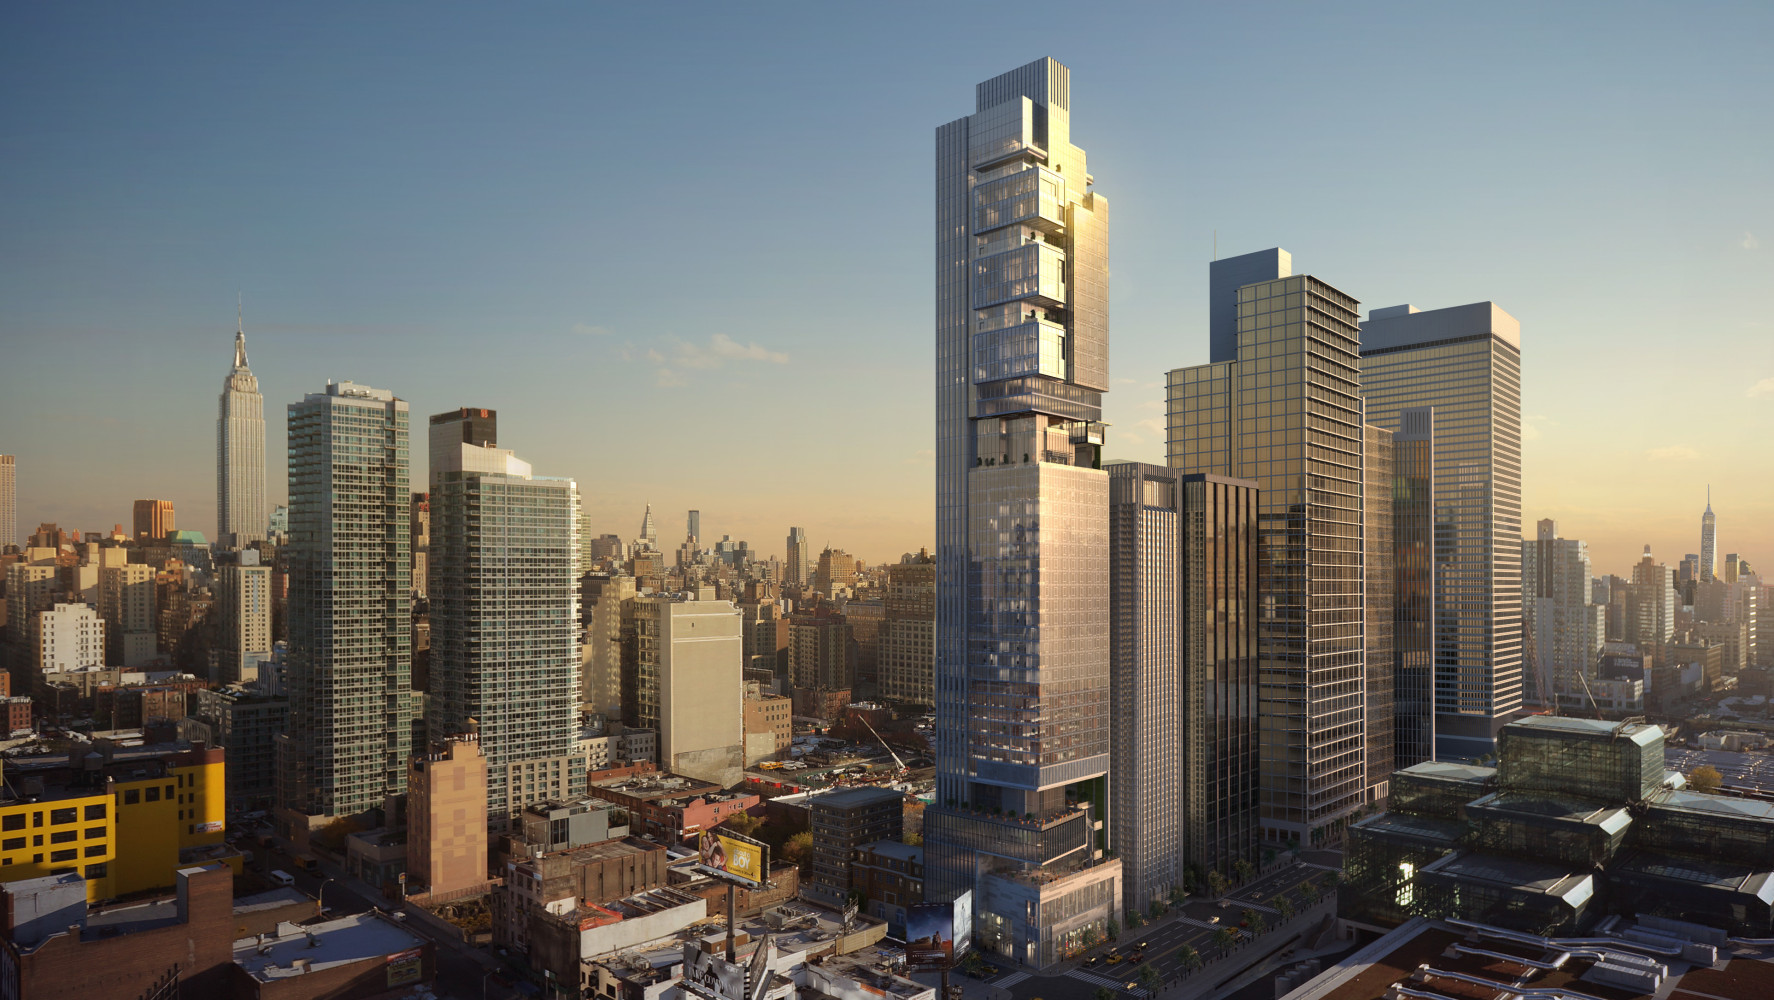 New York Hudson Yards Mixed-Use Development, by Archilier Architecture